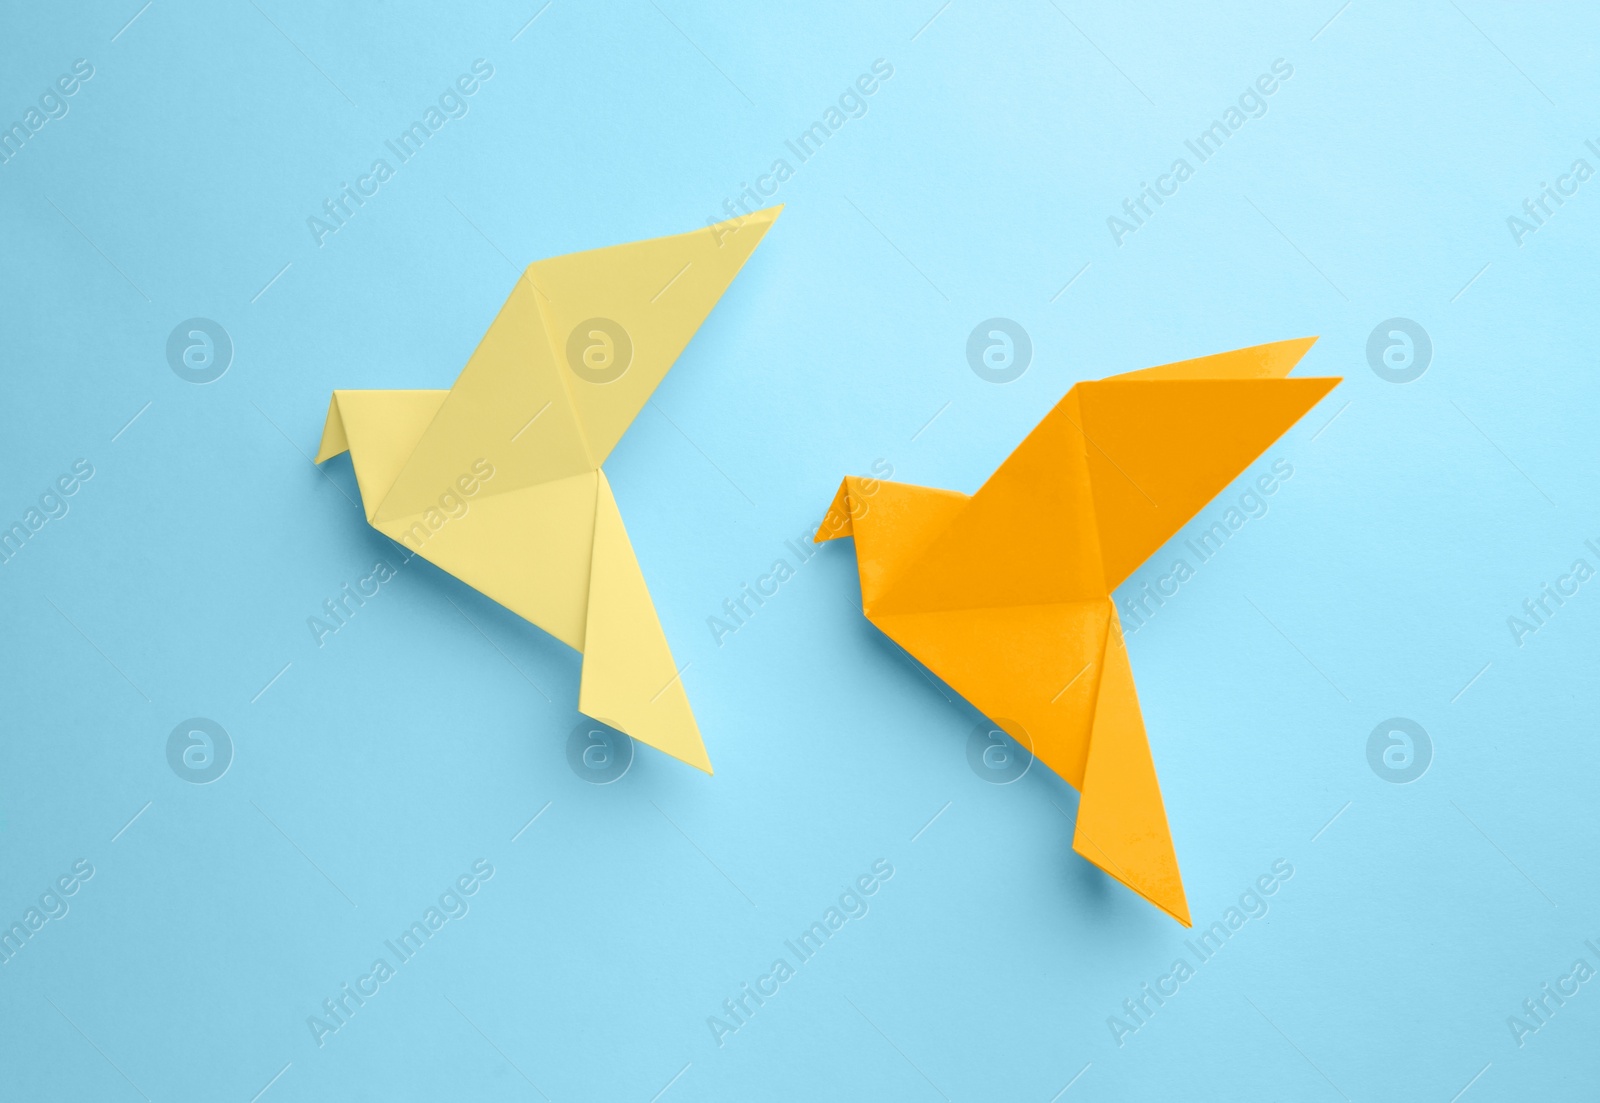 Photo of Origami art. Colorful handmade paper birds on light blue background, flat lay